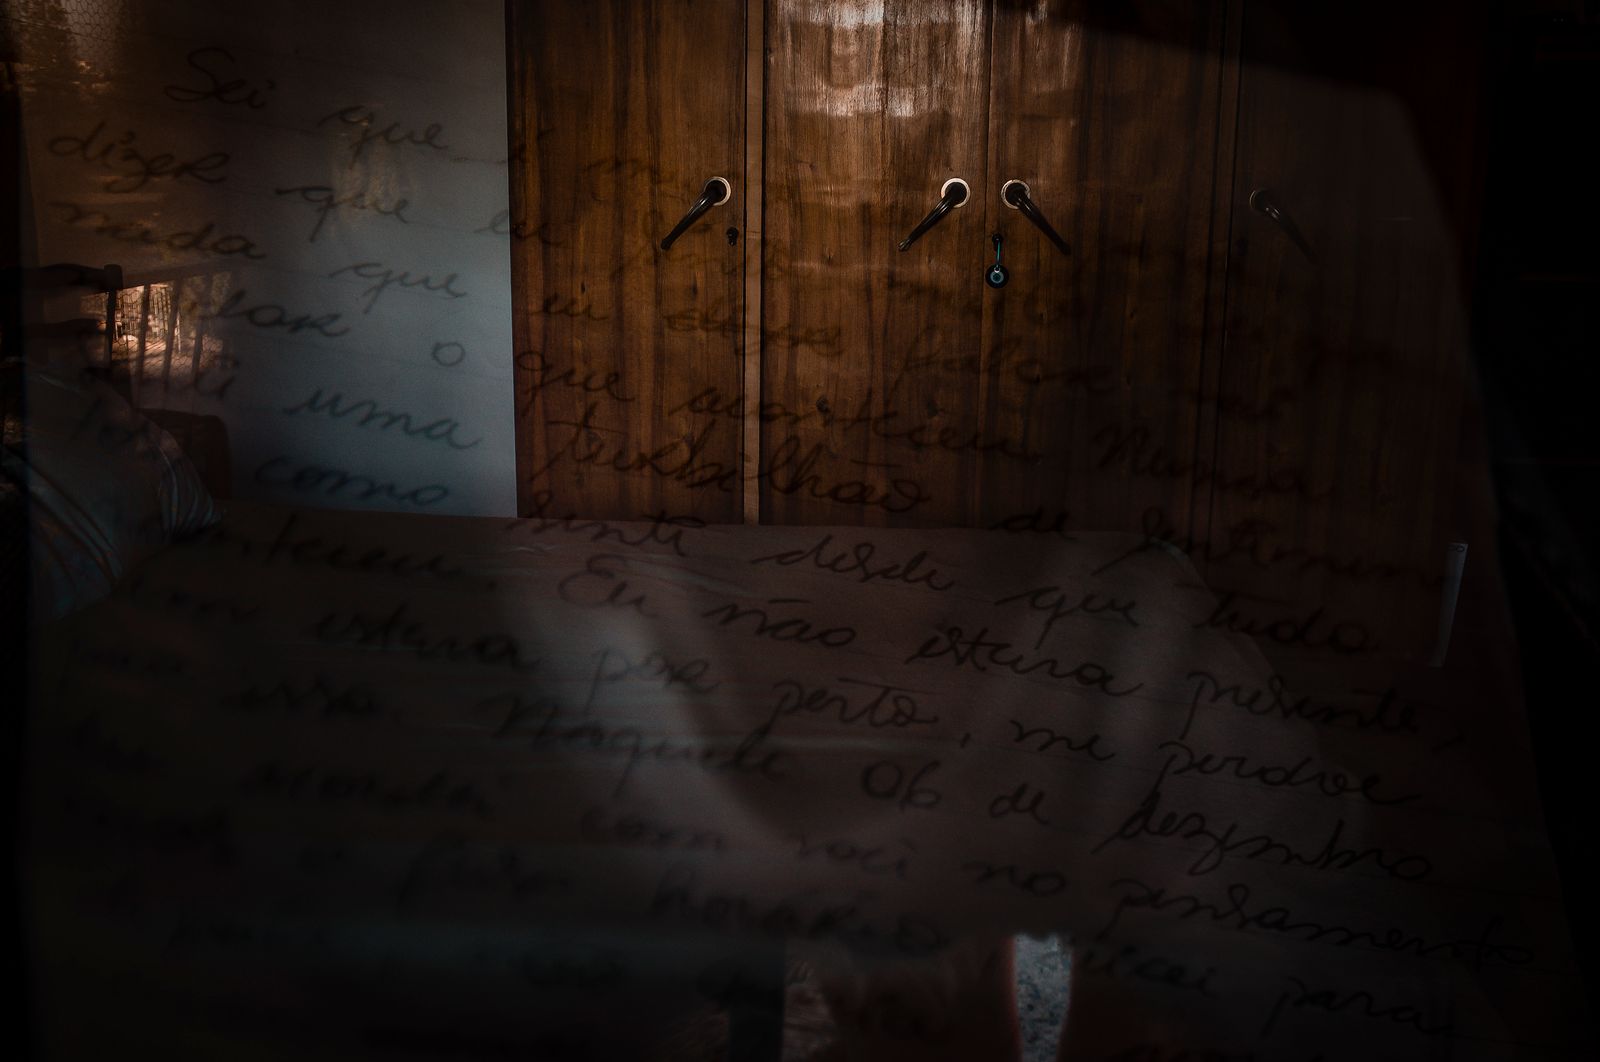 © Alinne Rezende - Image from the The last letter: what remains behind photography project